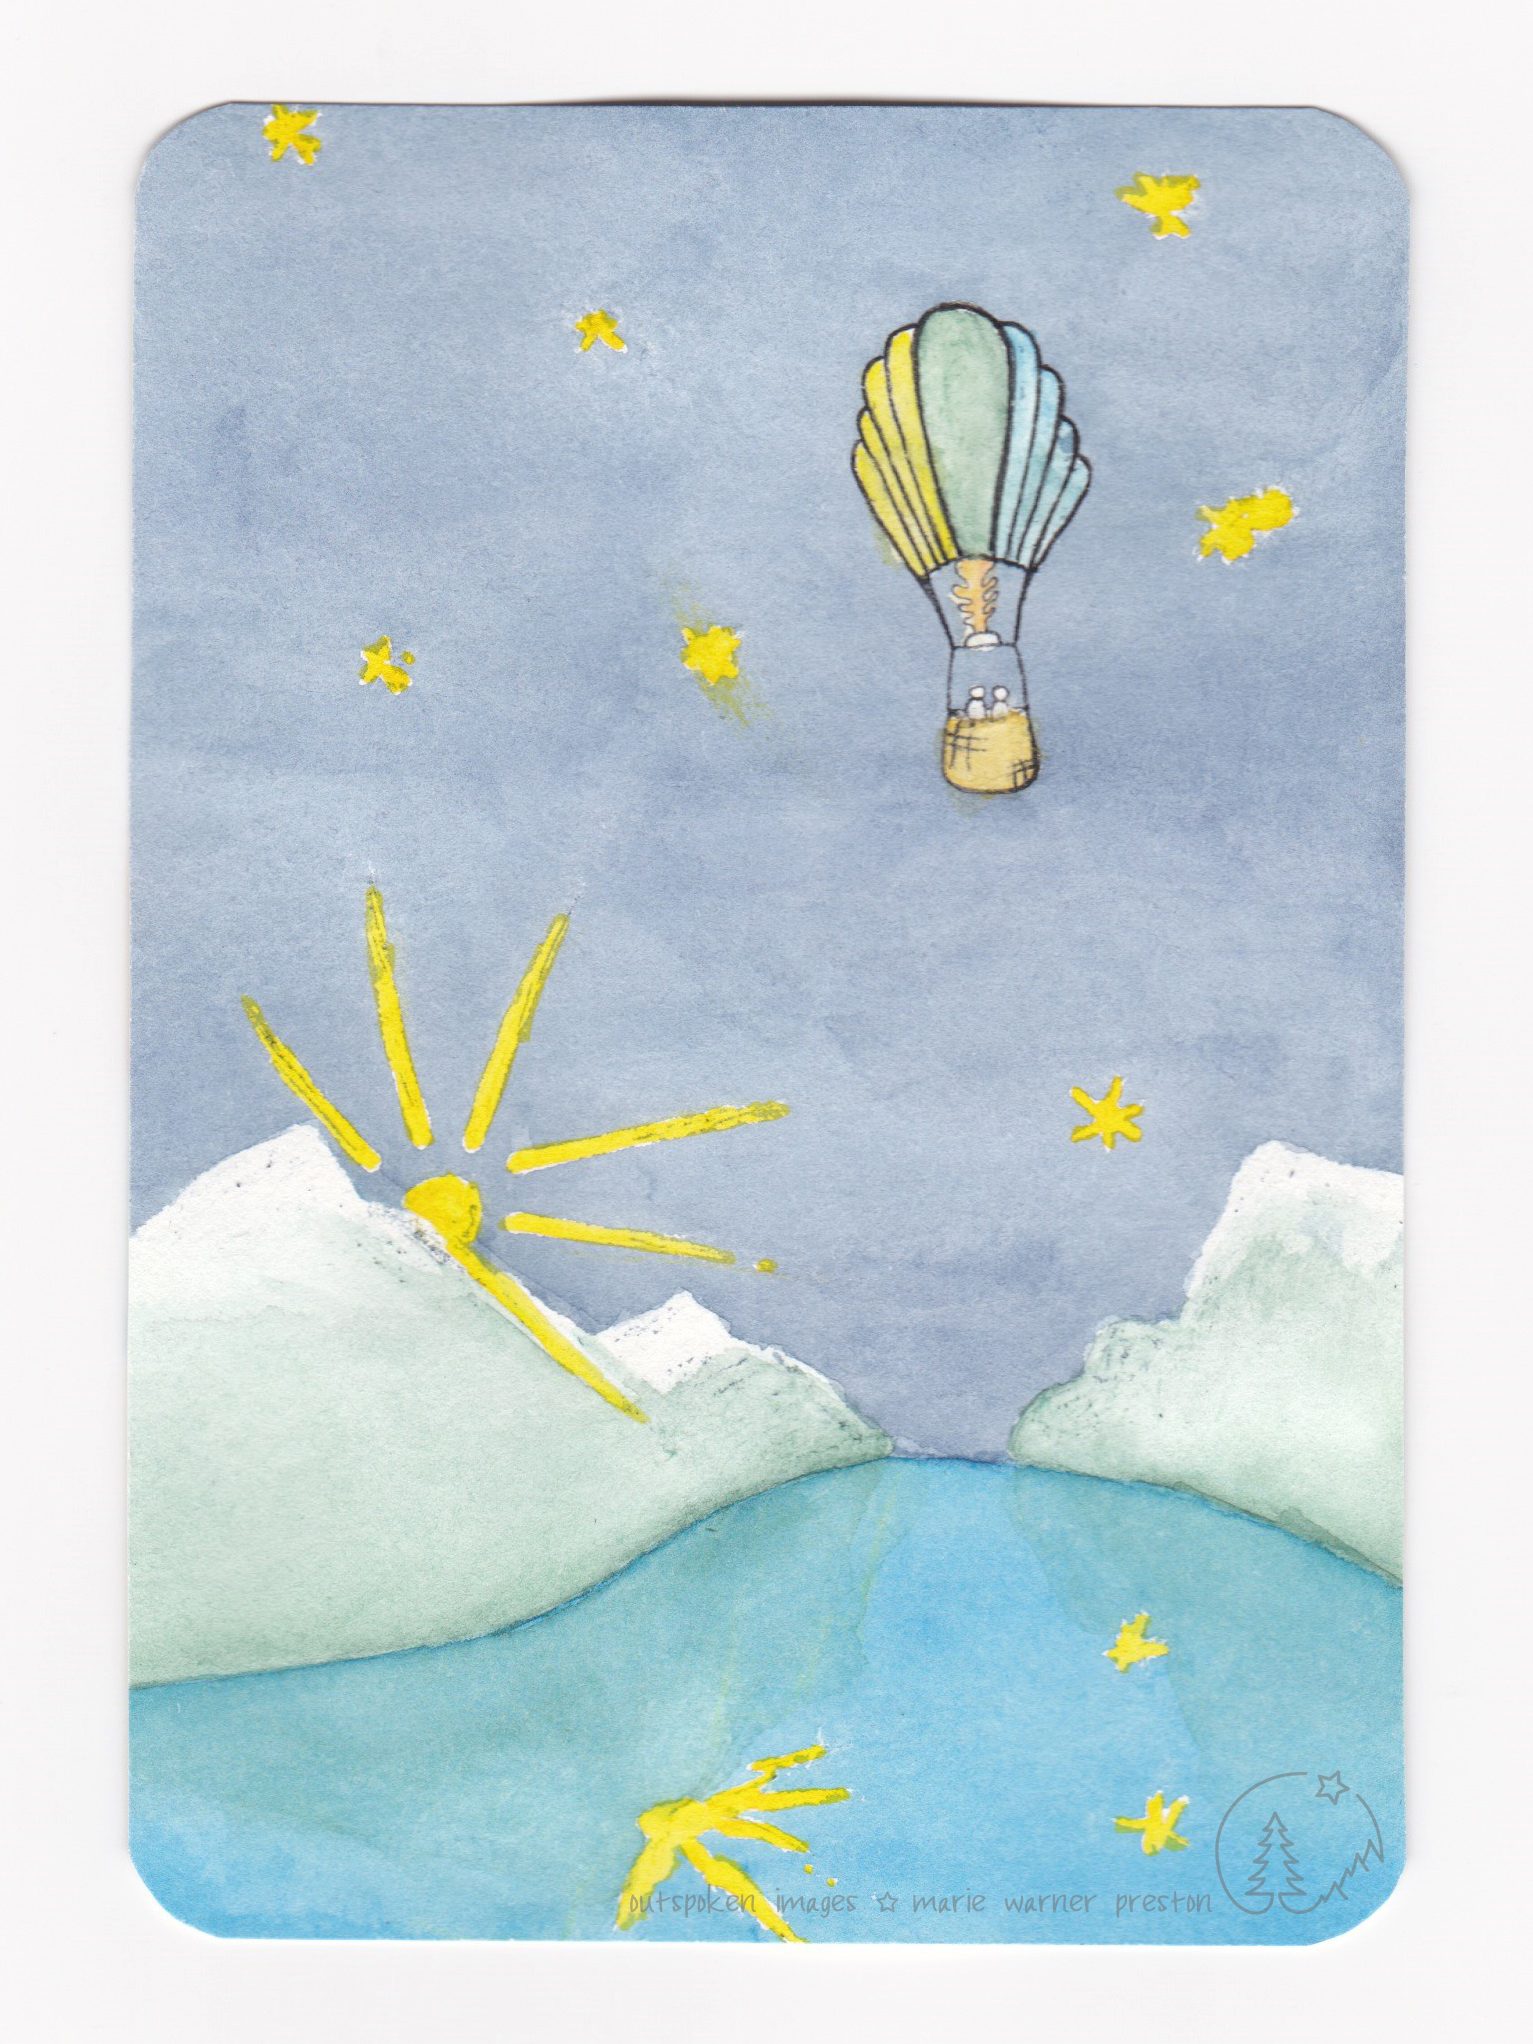 Watercolour painting: Yellow, green, and blue hot-air balloon in blue sky with yellow stars. Yellow sun rays over white and green mountains. Blue water reflecting sun and stars ©2022 Outspoken Images by Marie Warner Preston